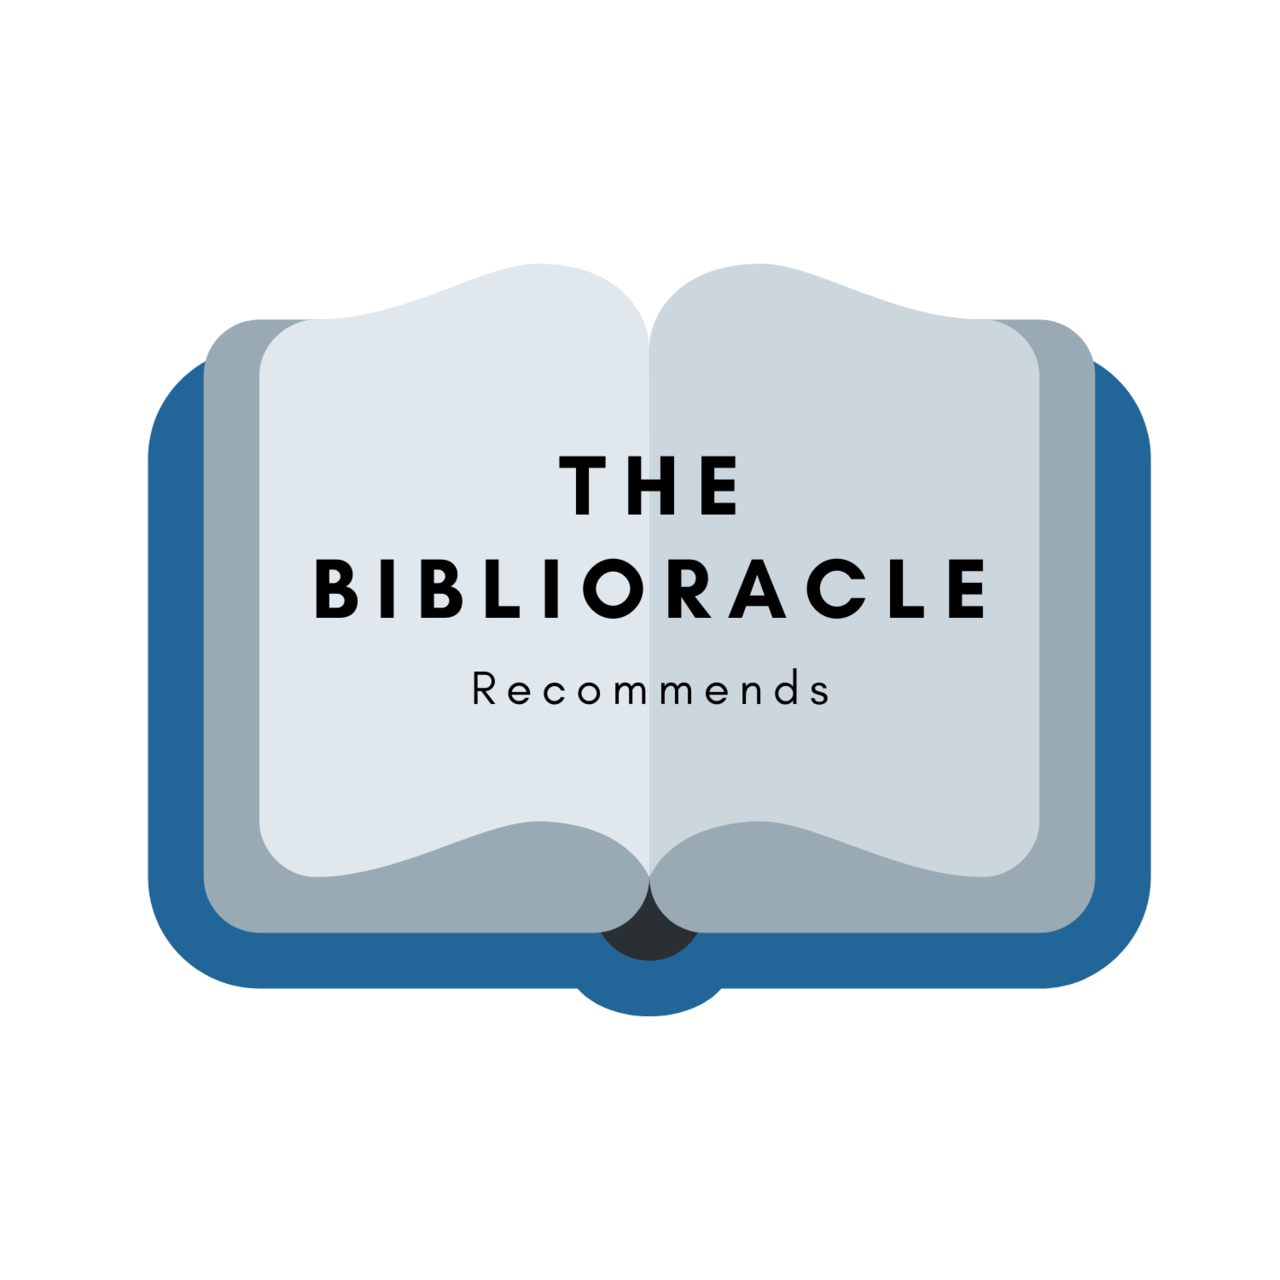 The Biblioracle Recommends